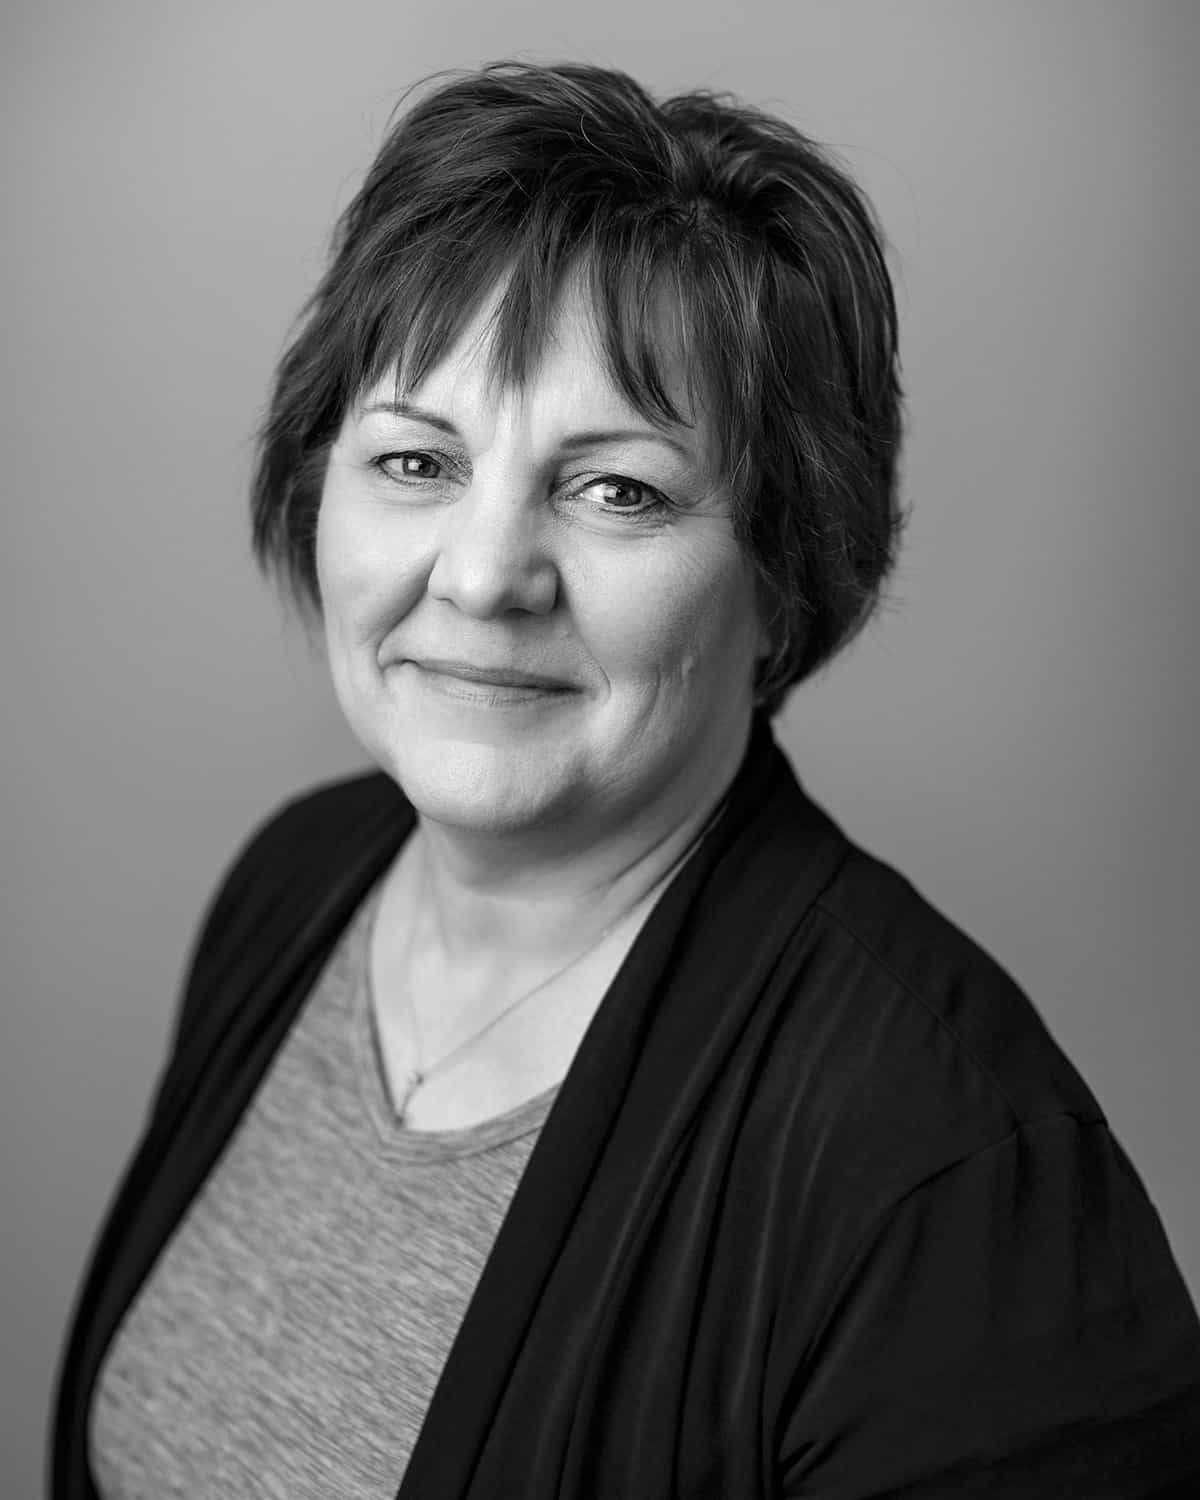 Black and white headshot of Lori Davies, a middle aged woman smiling